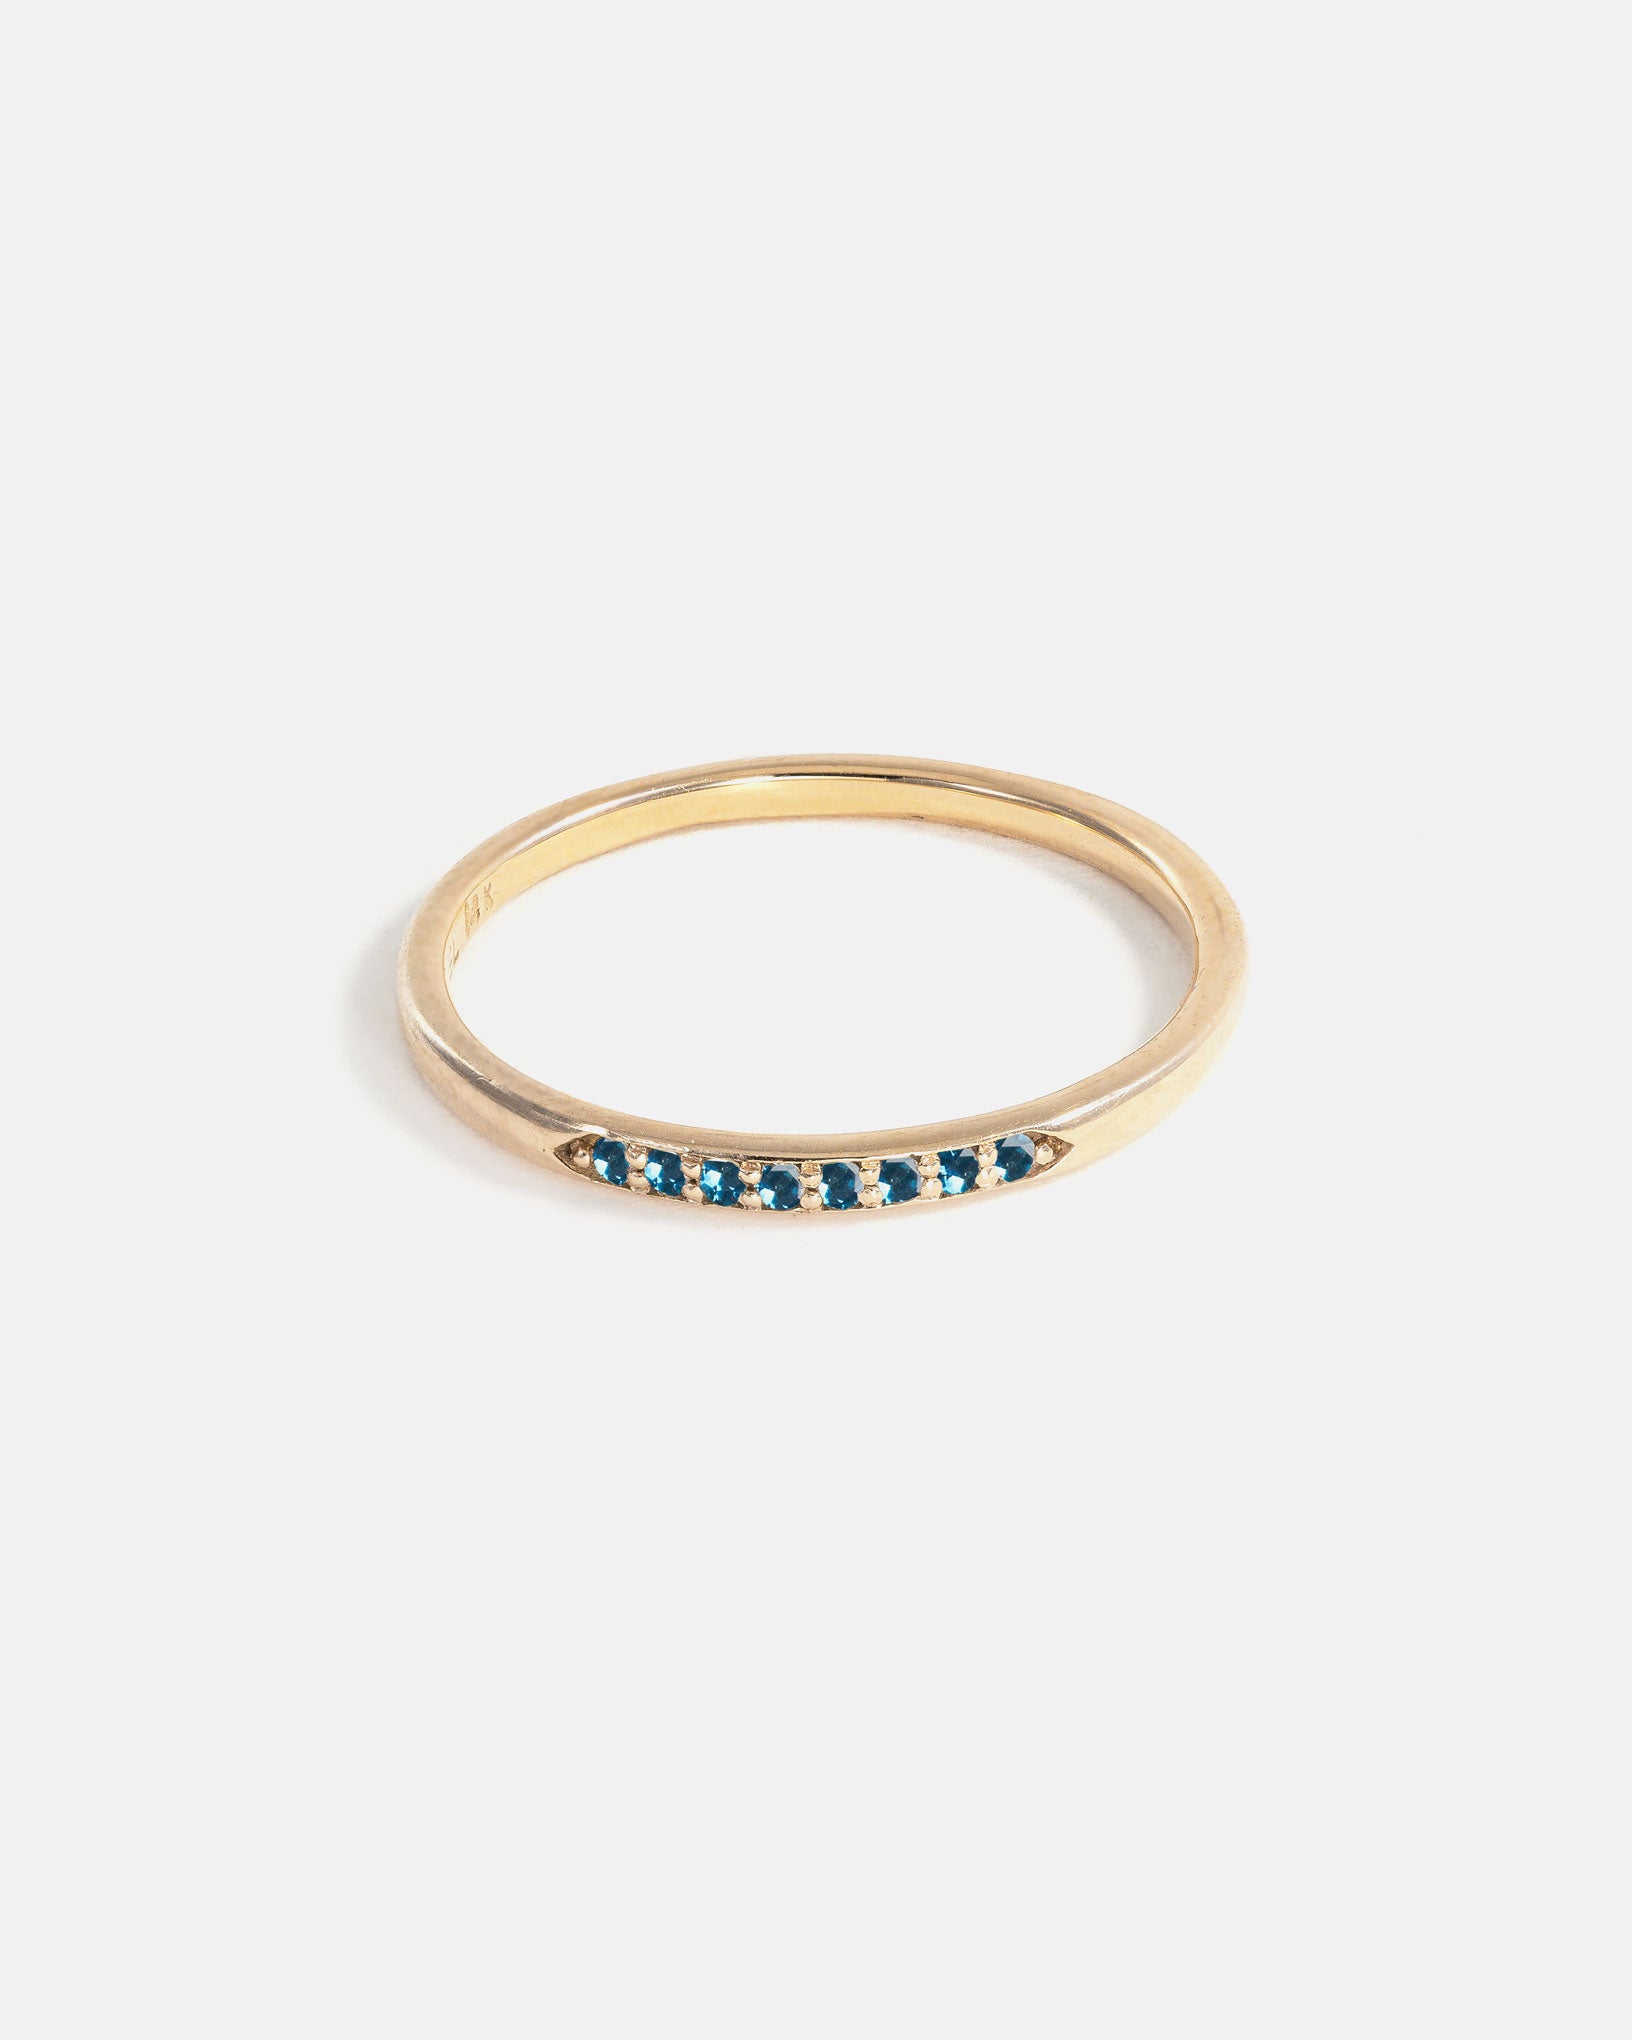 Stratura Wedding Ring in 14k Yellow Gold with Ethical Birthstones